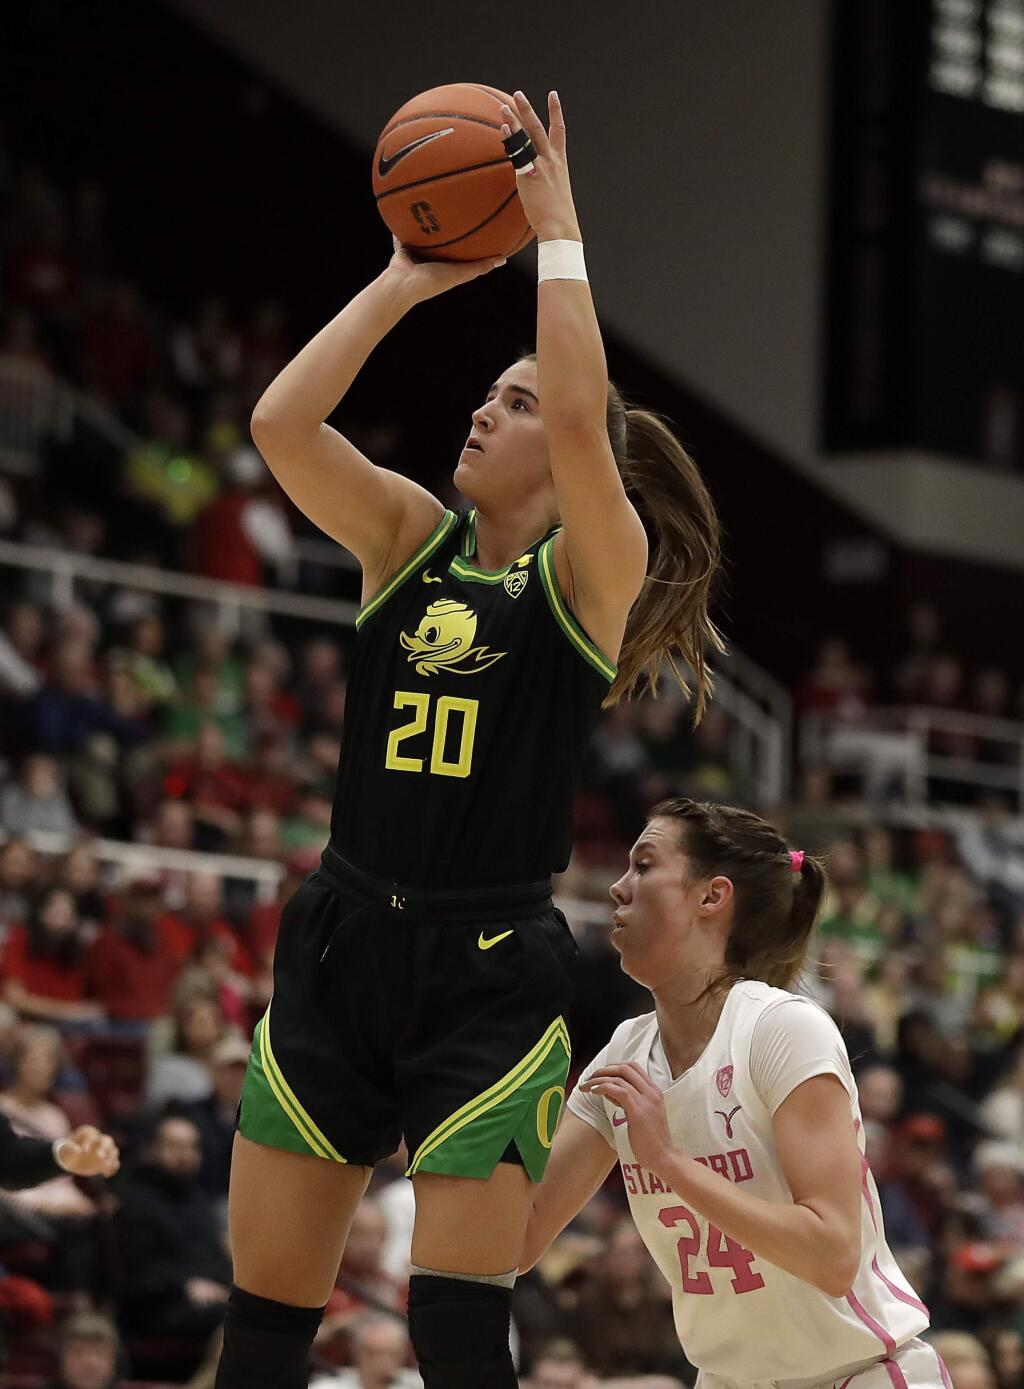 Oregon Ducks guard Sabrina Ionescu (20) shoots over Stanford's Lacie Hull, right, during the first half of an NCAA college basketball game Monday, Feb. 24, 2020, in Stanford, Calif. (AP Photo/Ben Margot)